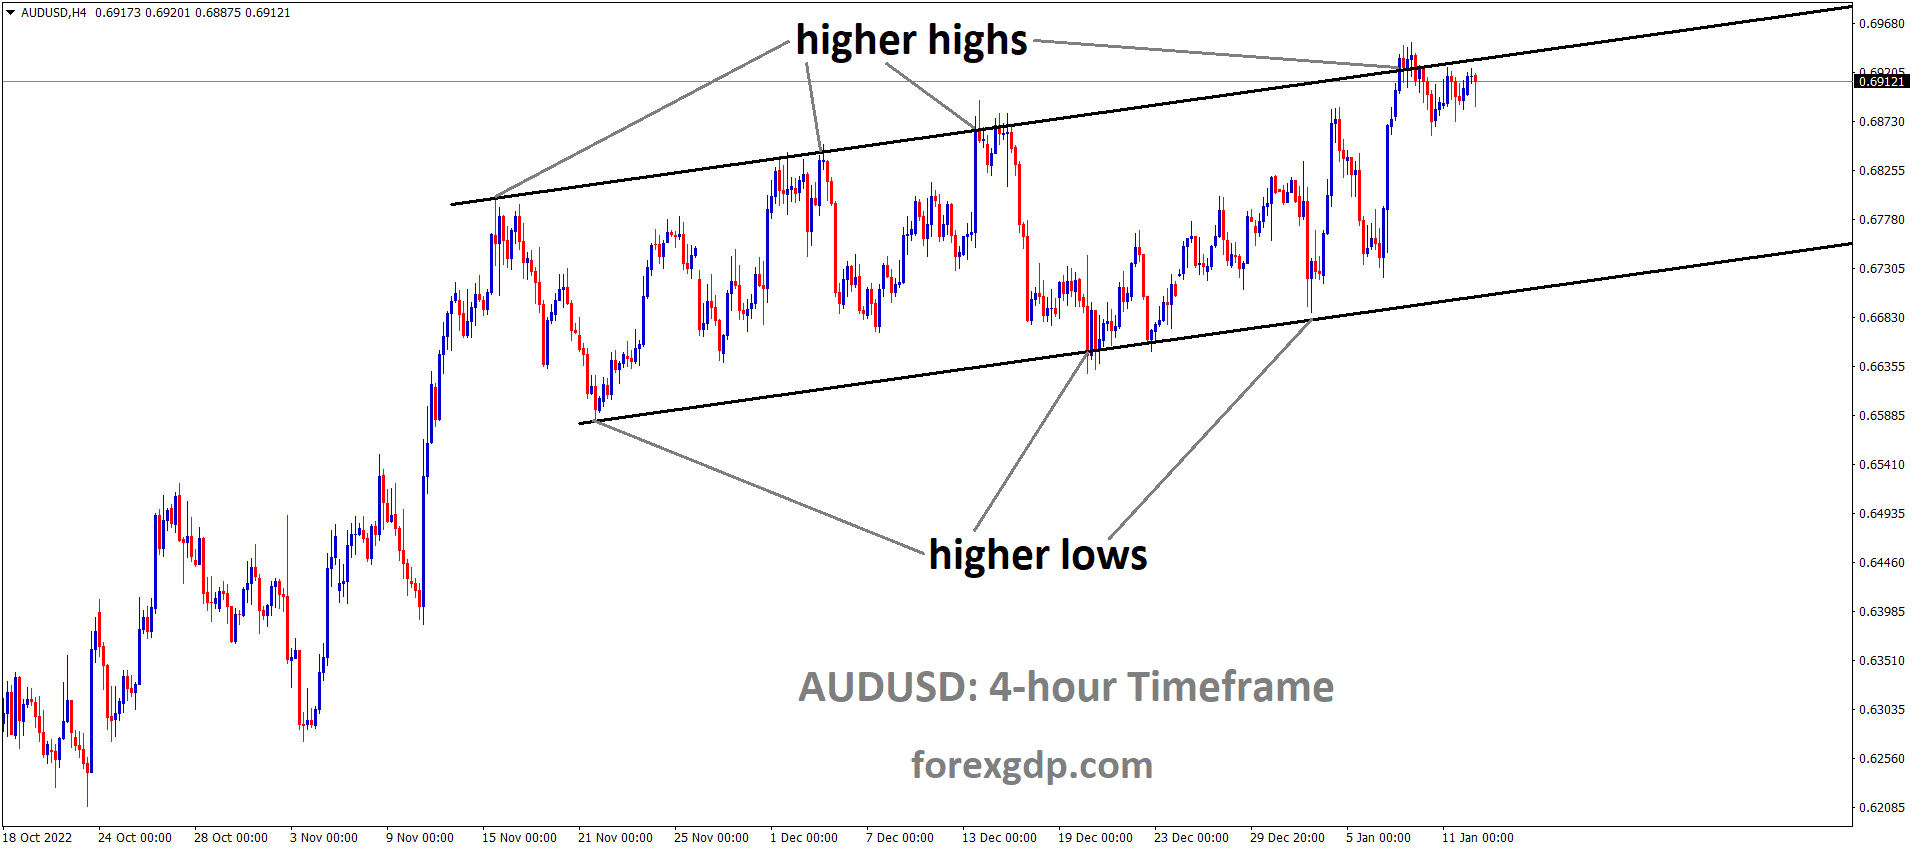 AUDUSD is moving in an Ascending channel and the market has reached the higher high area of the channel 2